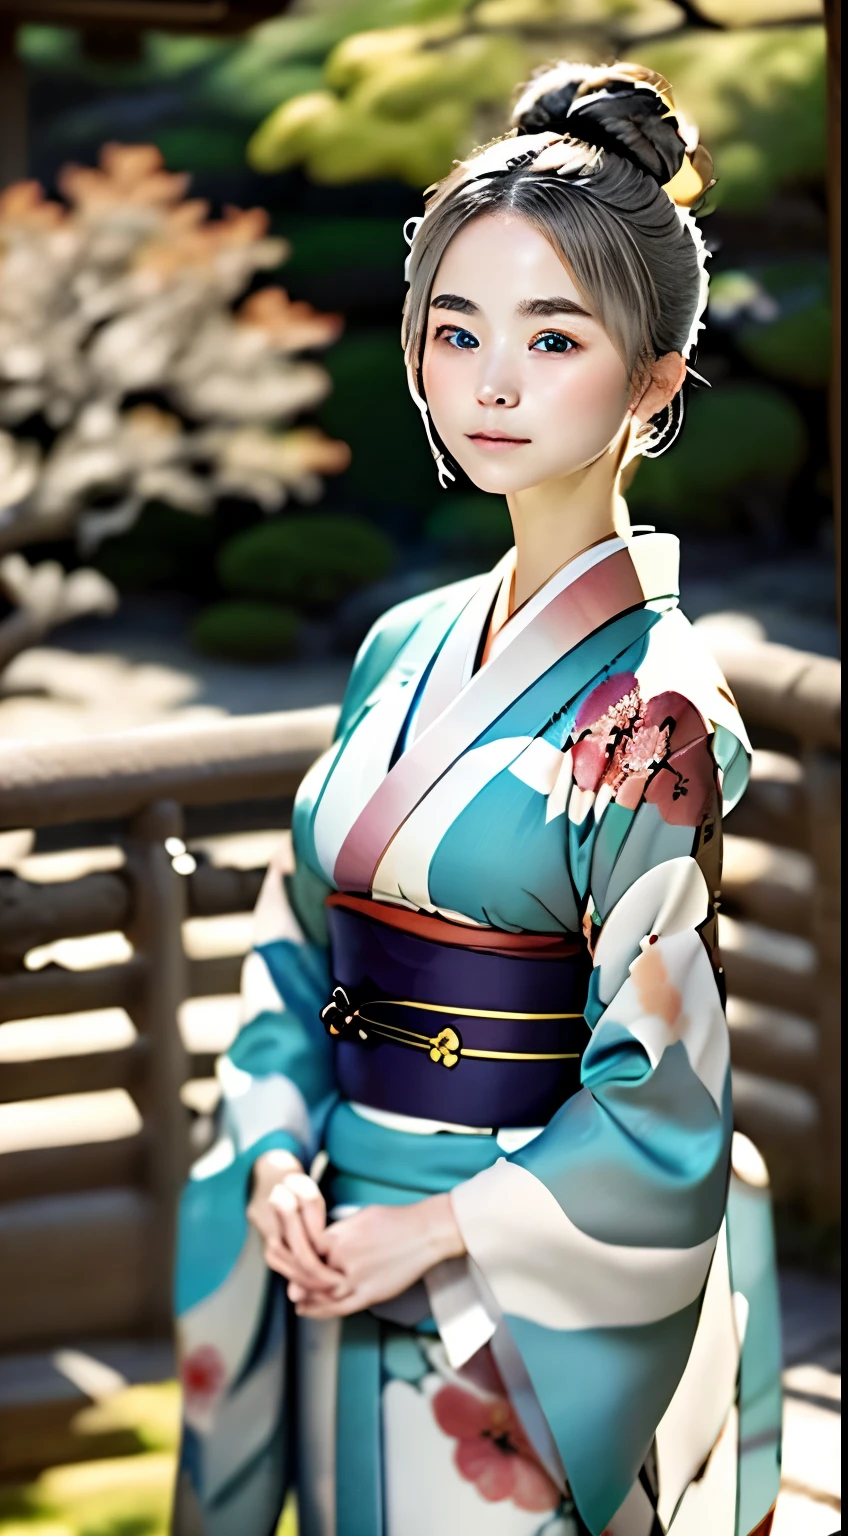 beautiful turquoise eyes、beautiful nordic girl、１６talent、ash gray hair、bun hair、Perfect good looks、Beautiful skin like porcelain、detailed skitomy、Correct depiction of the human body、An ennui look、plump lips、kimono、Beautiful Nishijin-ori kimono、A kimono with a detailed pattern、elegant、silence、refinement、highest quality、Highest image quality、master piece:1.3、Portrait、perfect lighting、professional photographer、The background is blurry、blurred background、Gardens in Kyoto、Karesansui、sand and rock garden、old taste